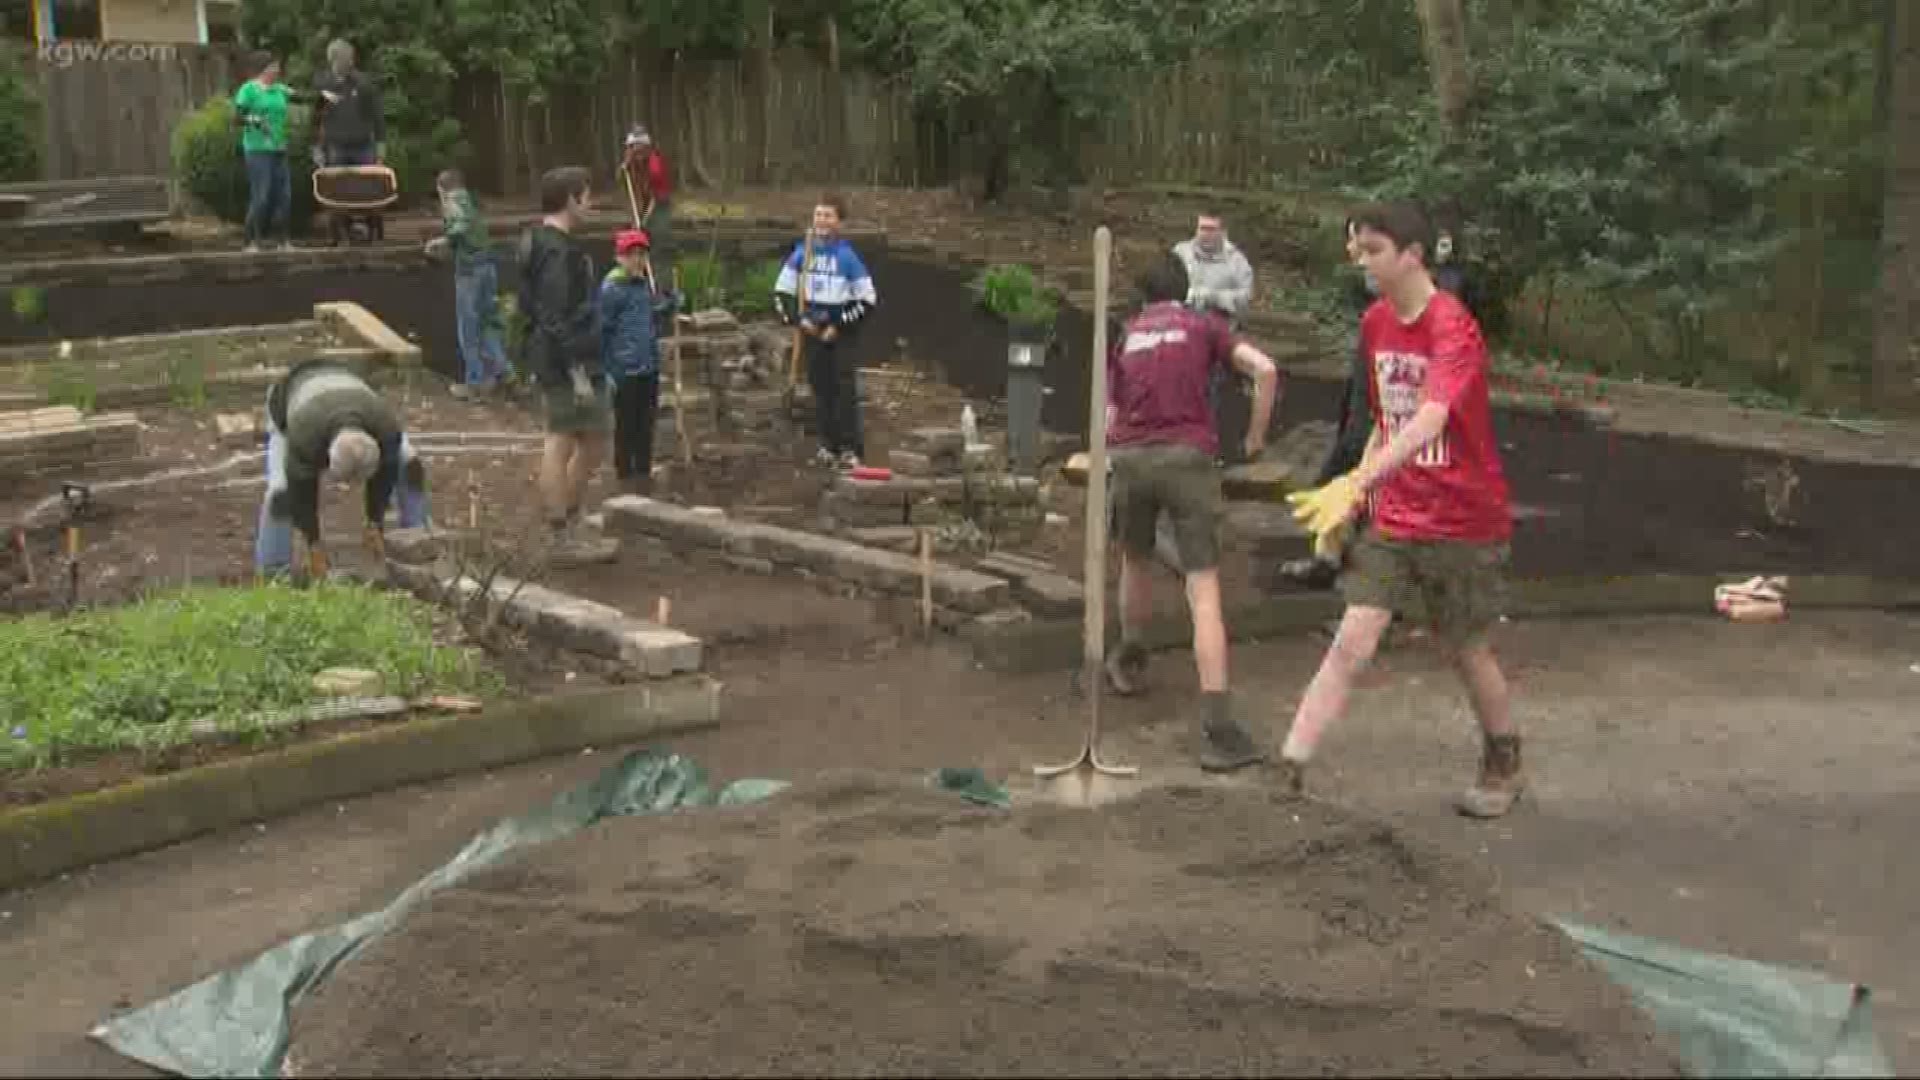 A local all-girl troop joined an all-boy troop to help on an Eagle Scout project Saturday in Tualatin.